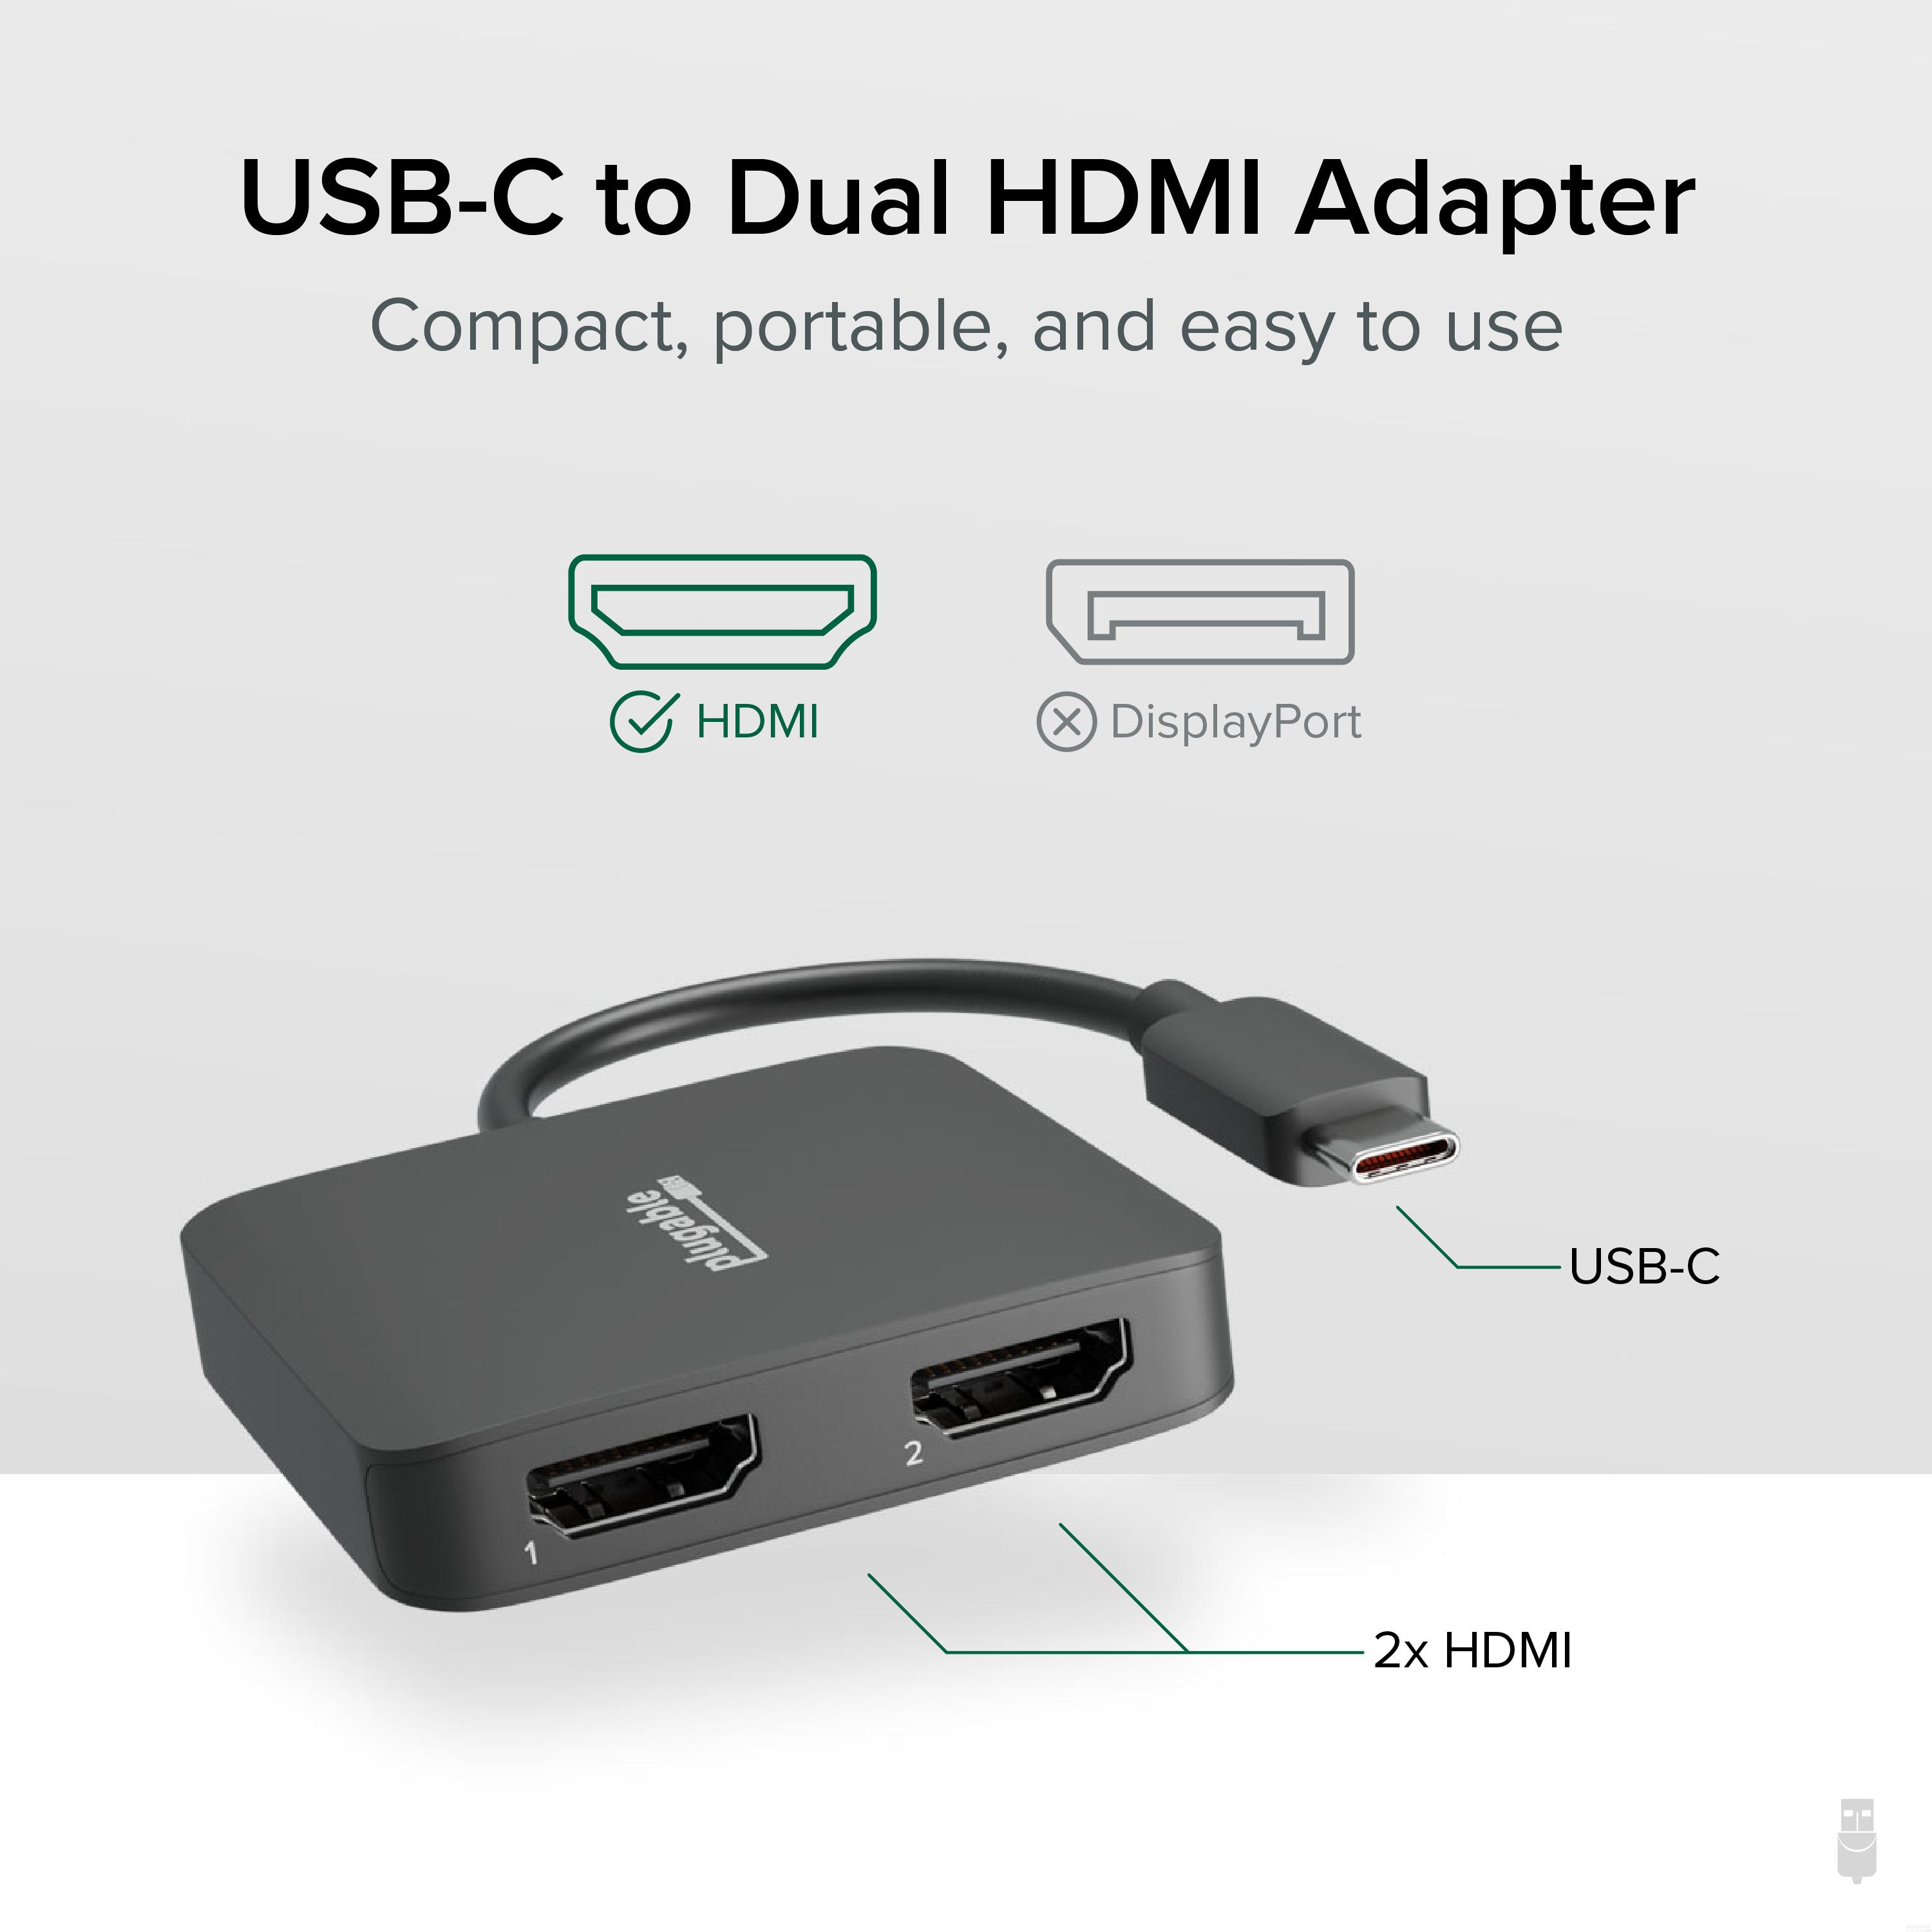 Plugable USB C to Dual HDMI Adapter, 4K HDMI Ports, for Windows and Chromebook, Driverless - image 2 of 9